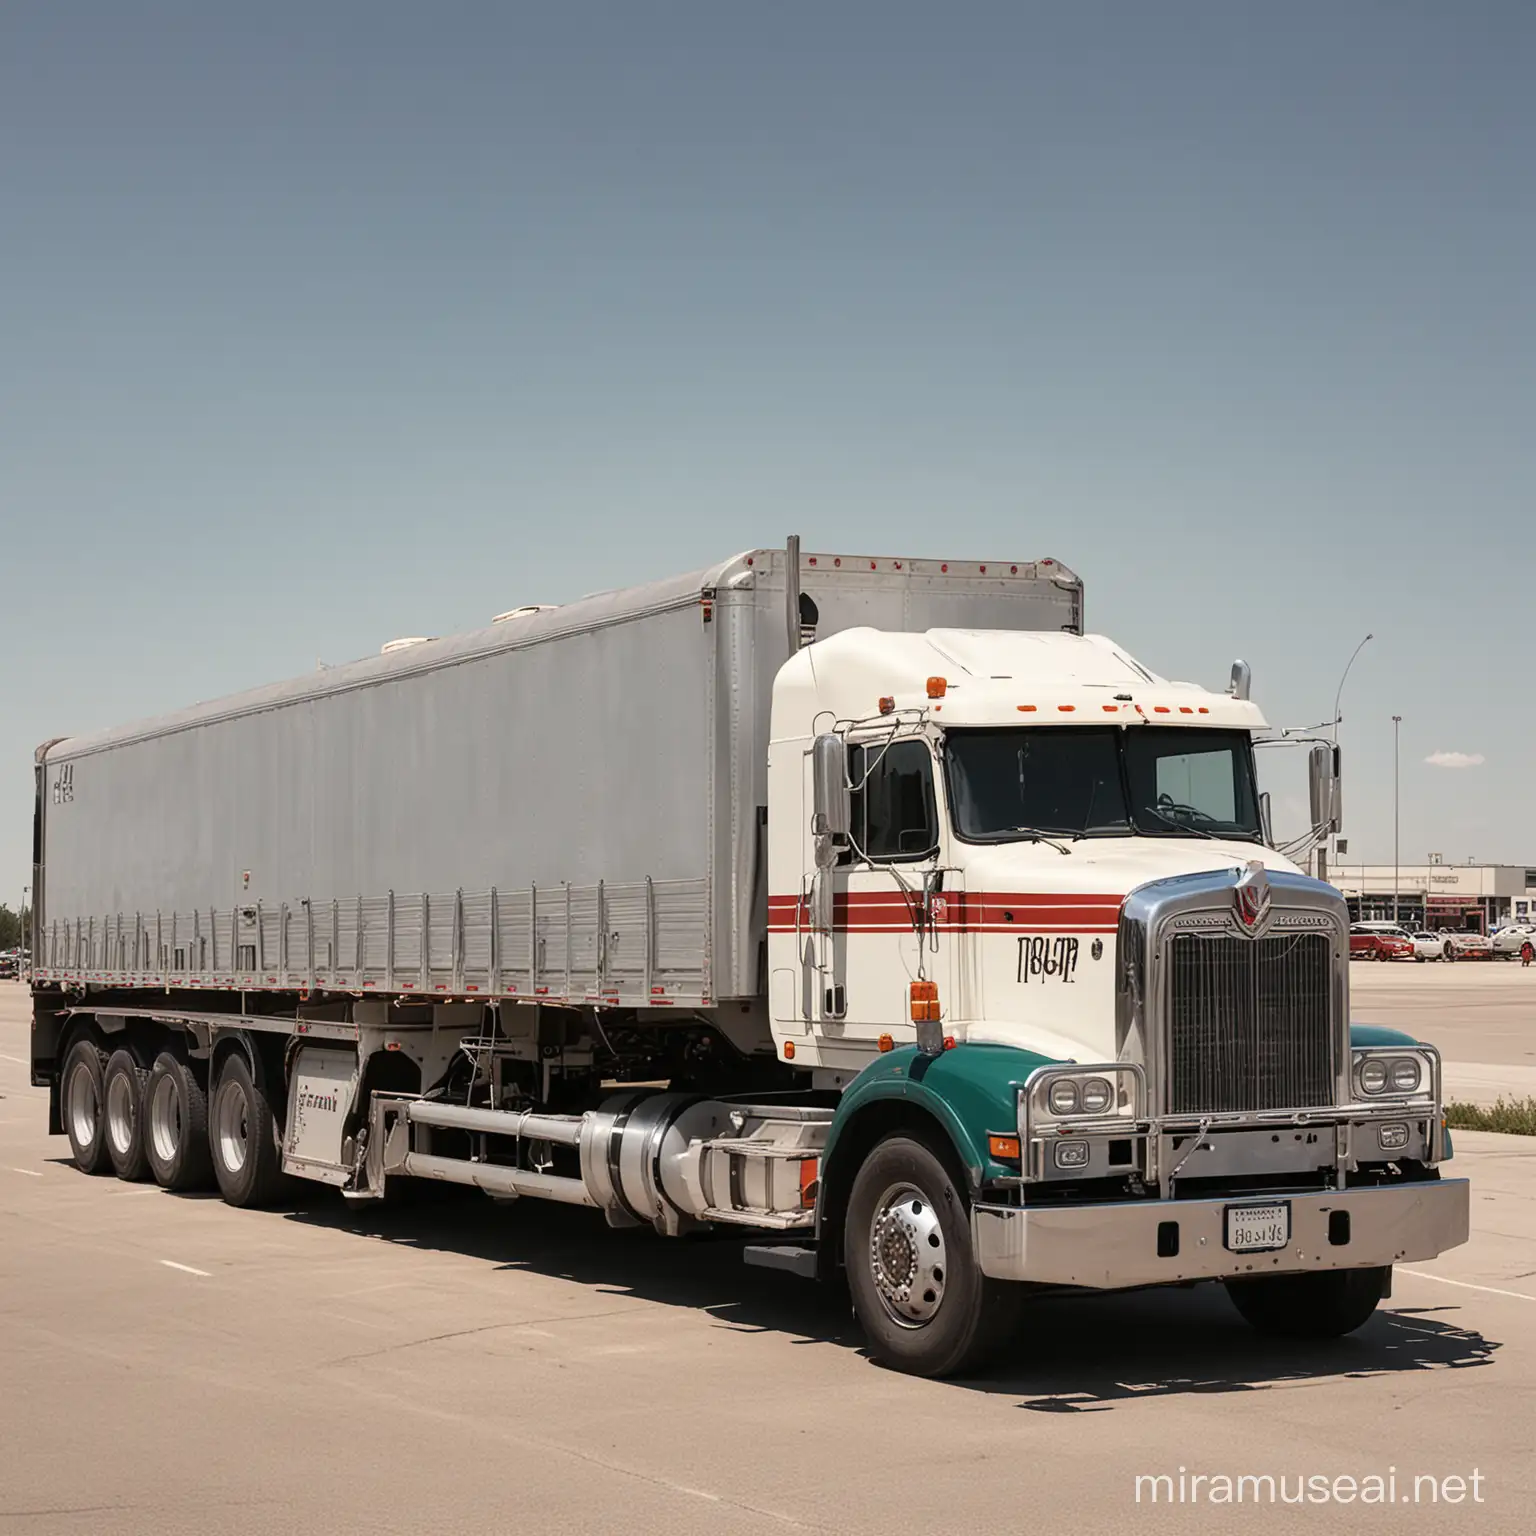 A European style truck made by Northrop Gruman, parked on an American truckstop